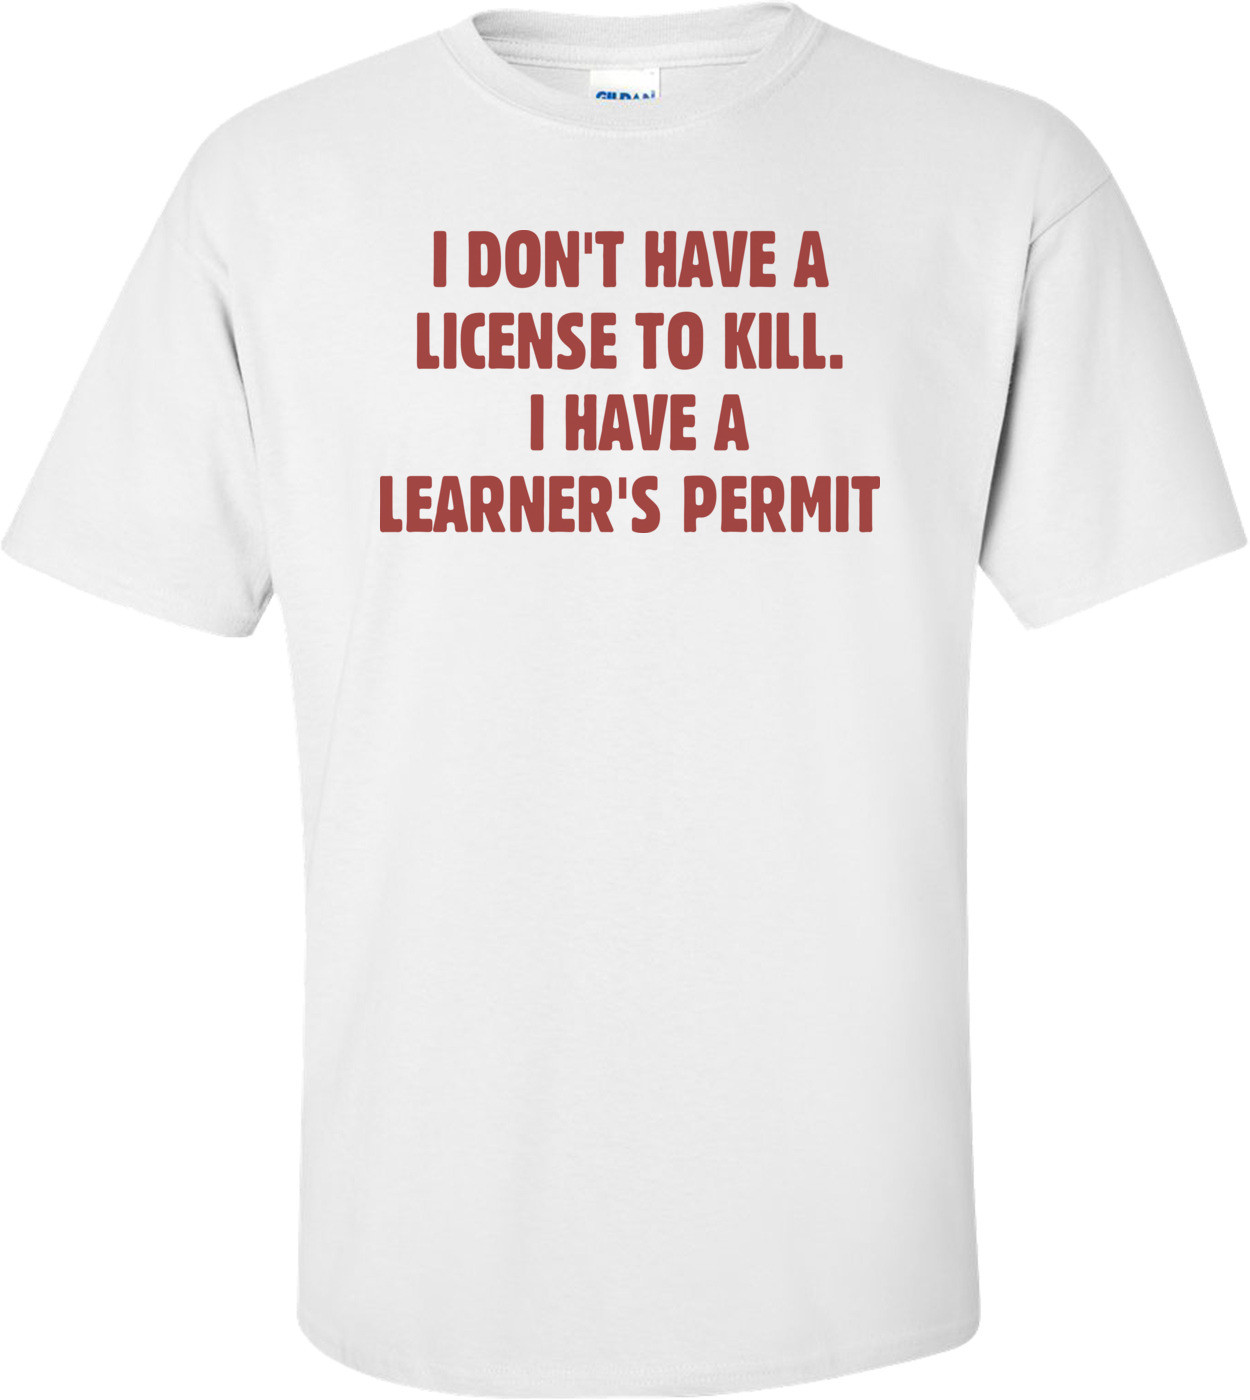 I Don't Have A License To Kill. I Have A Learner's Permit